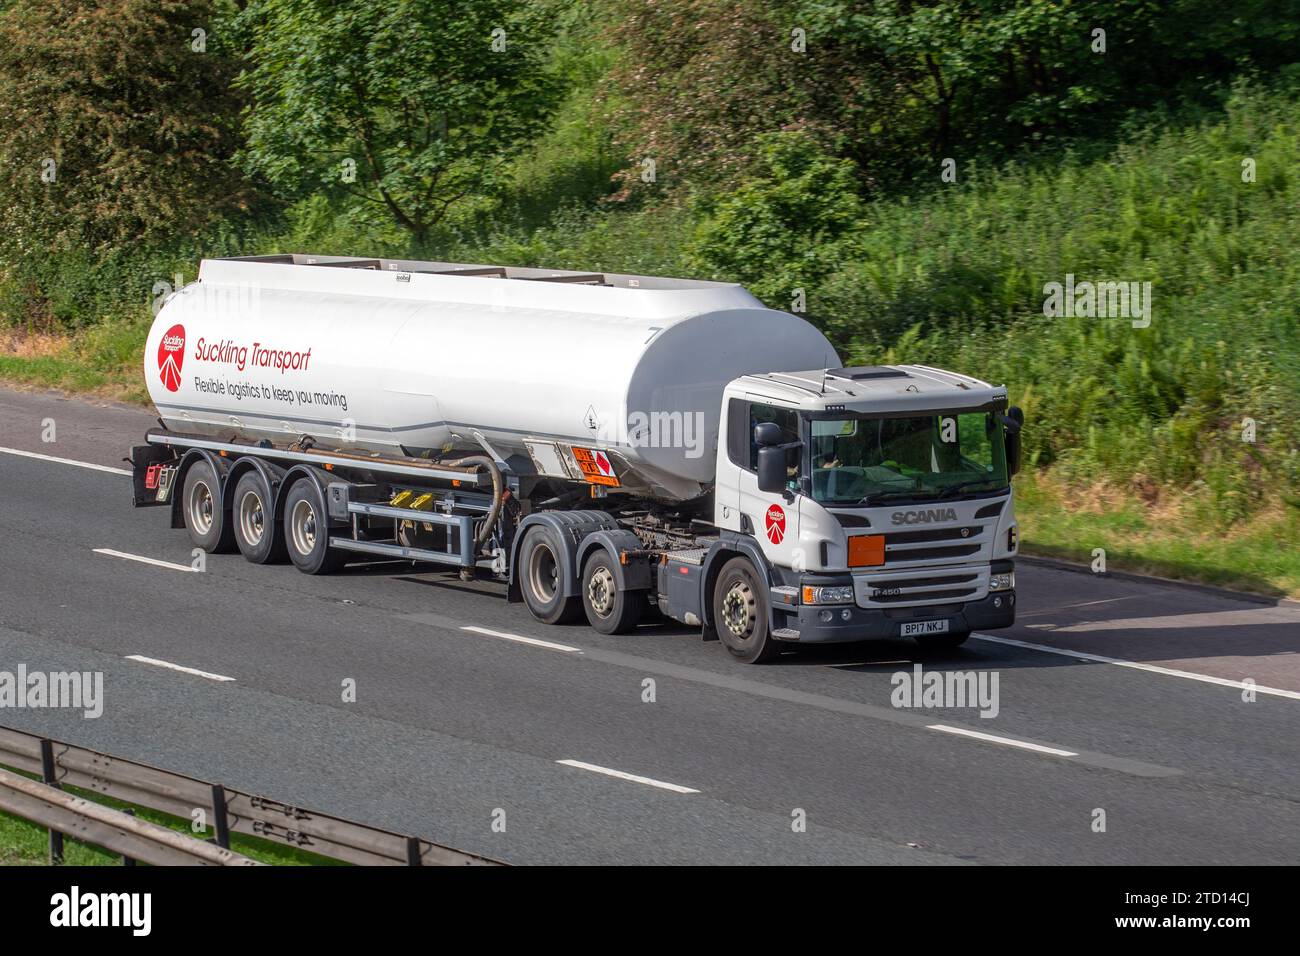 Suckling Transport Ltd Scania P450 diesel 12740 cc. Road tanker vehicles in the UK and delivering nearly 2bn litres of gasoline inflammable liquid. Stock Photo